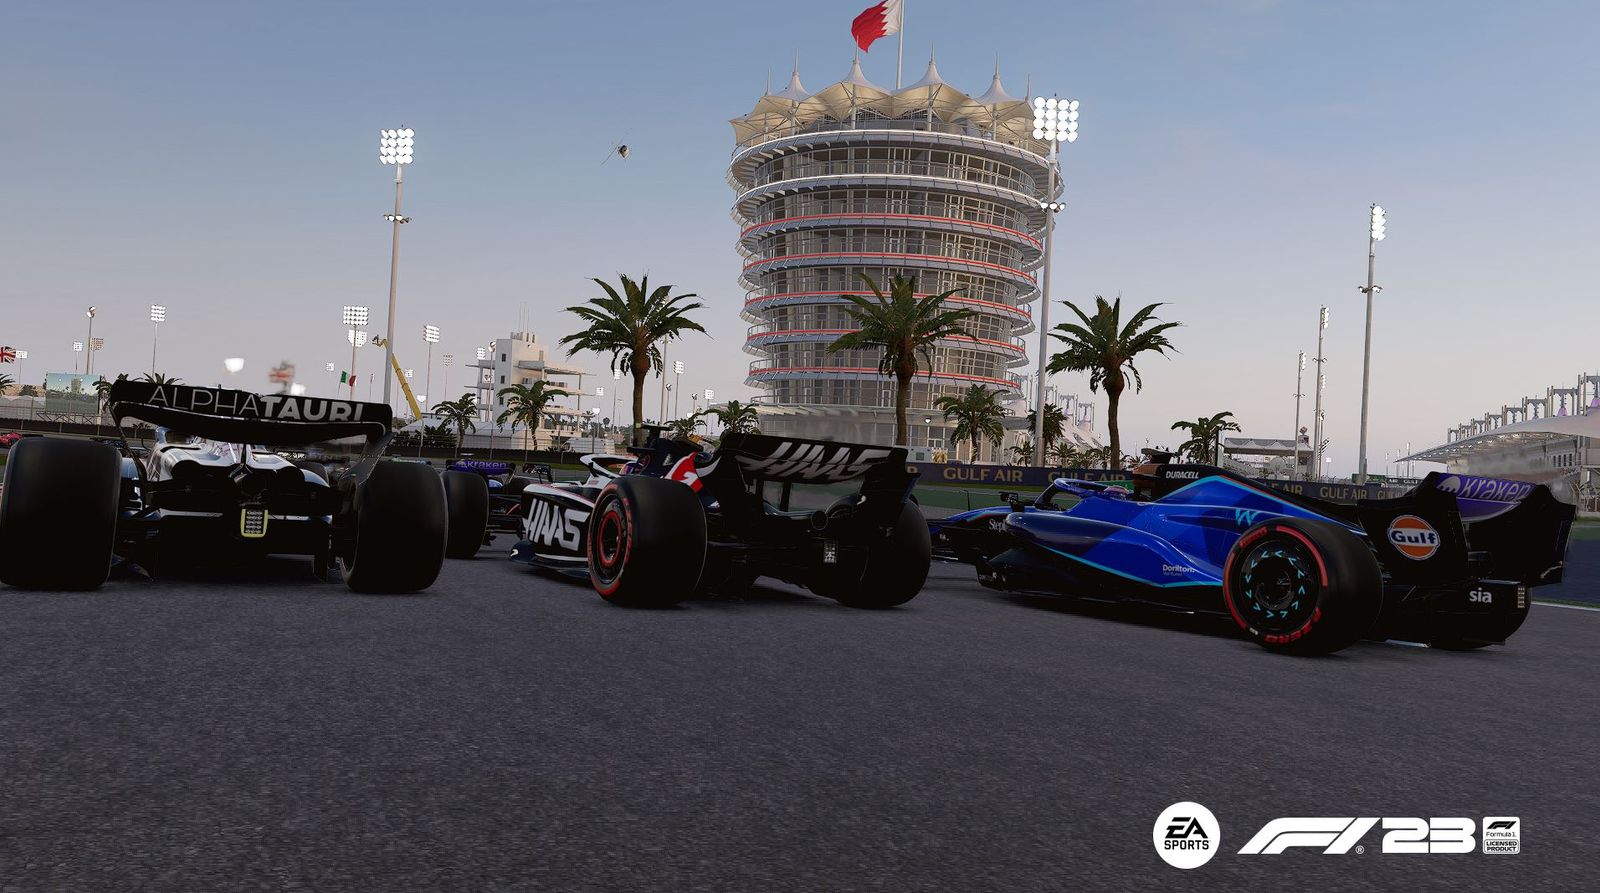 Three wide at Bahrain turn 1 in F1 23